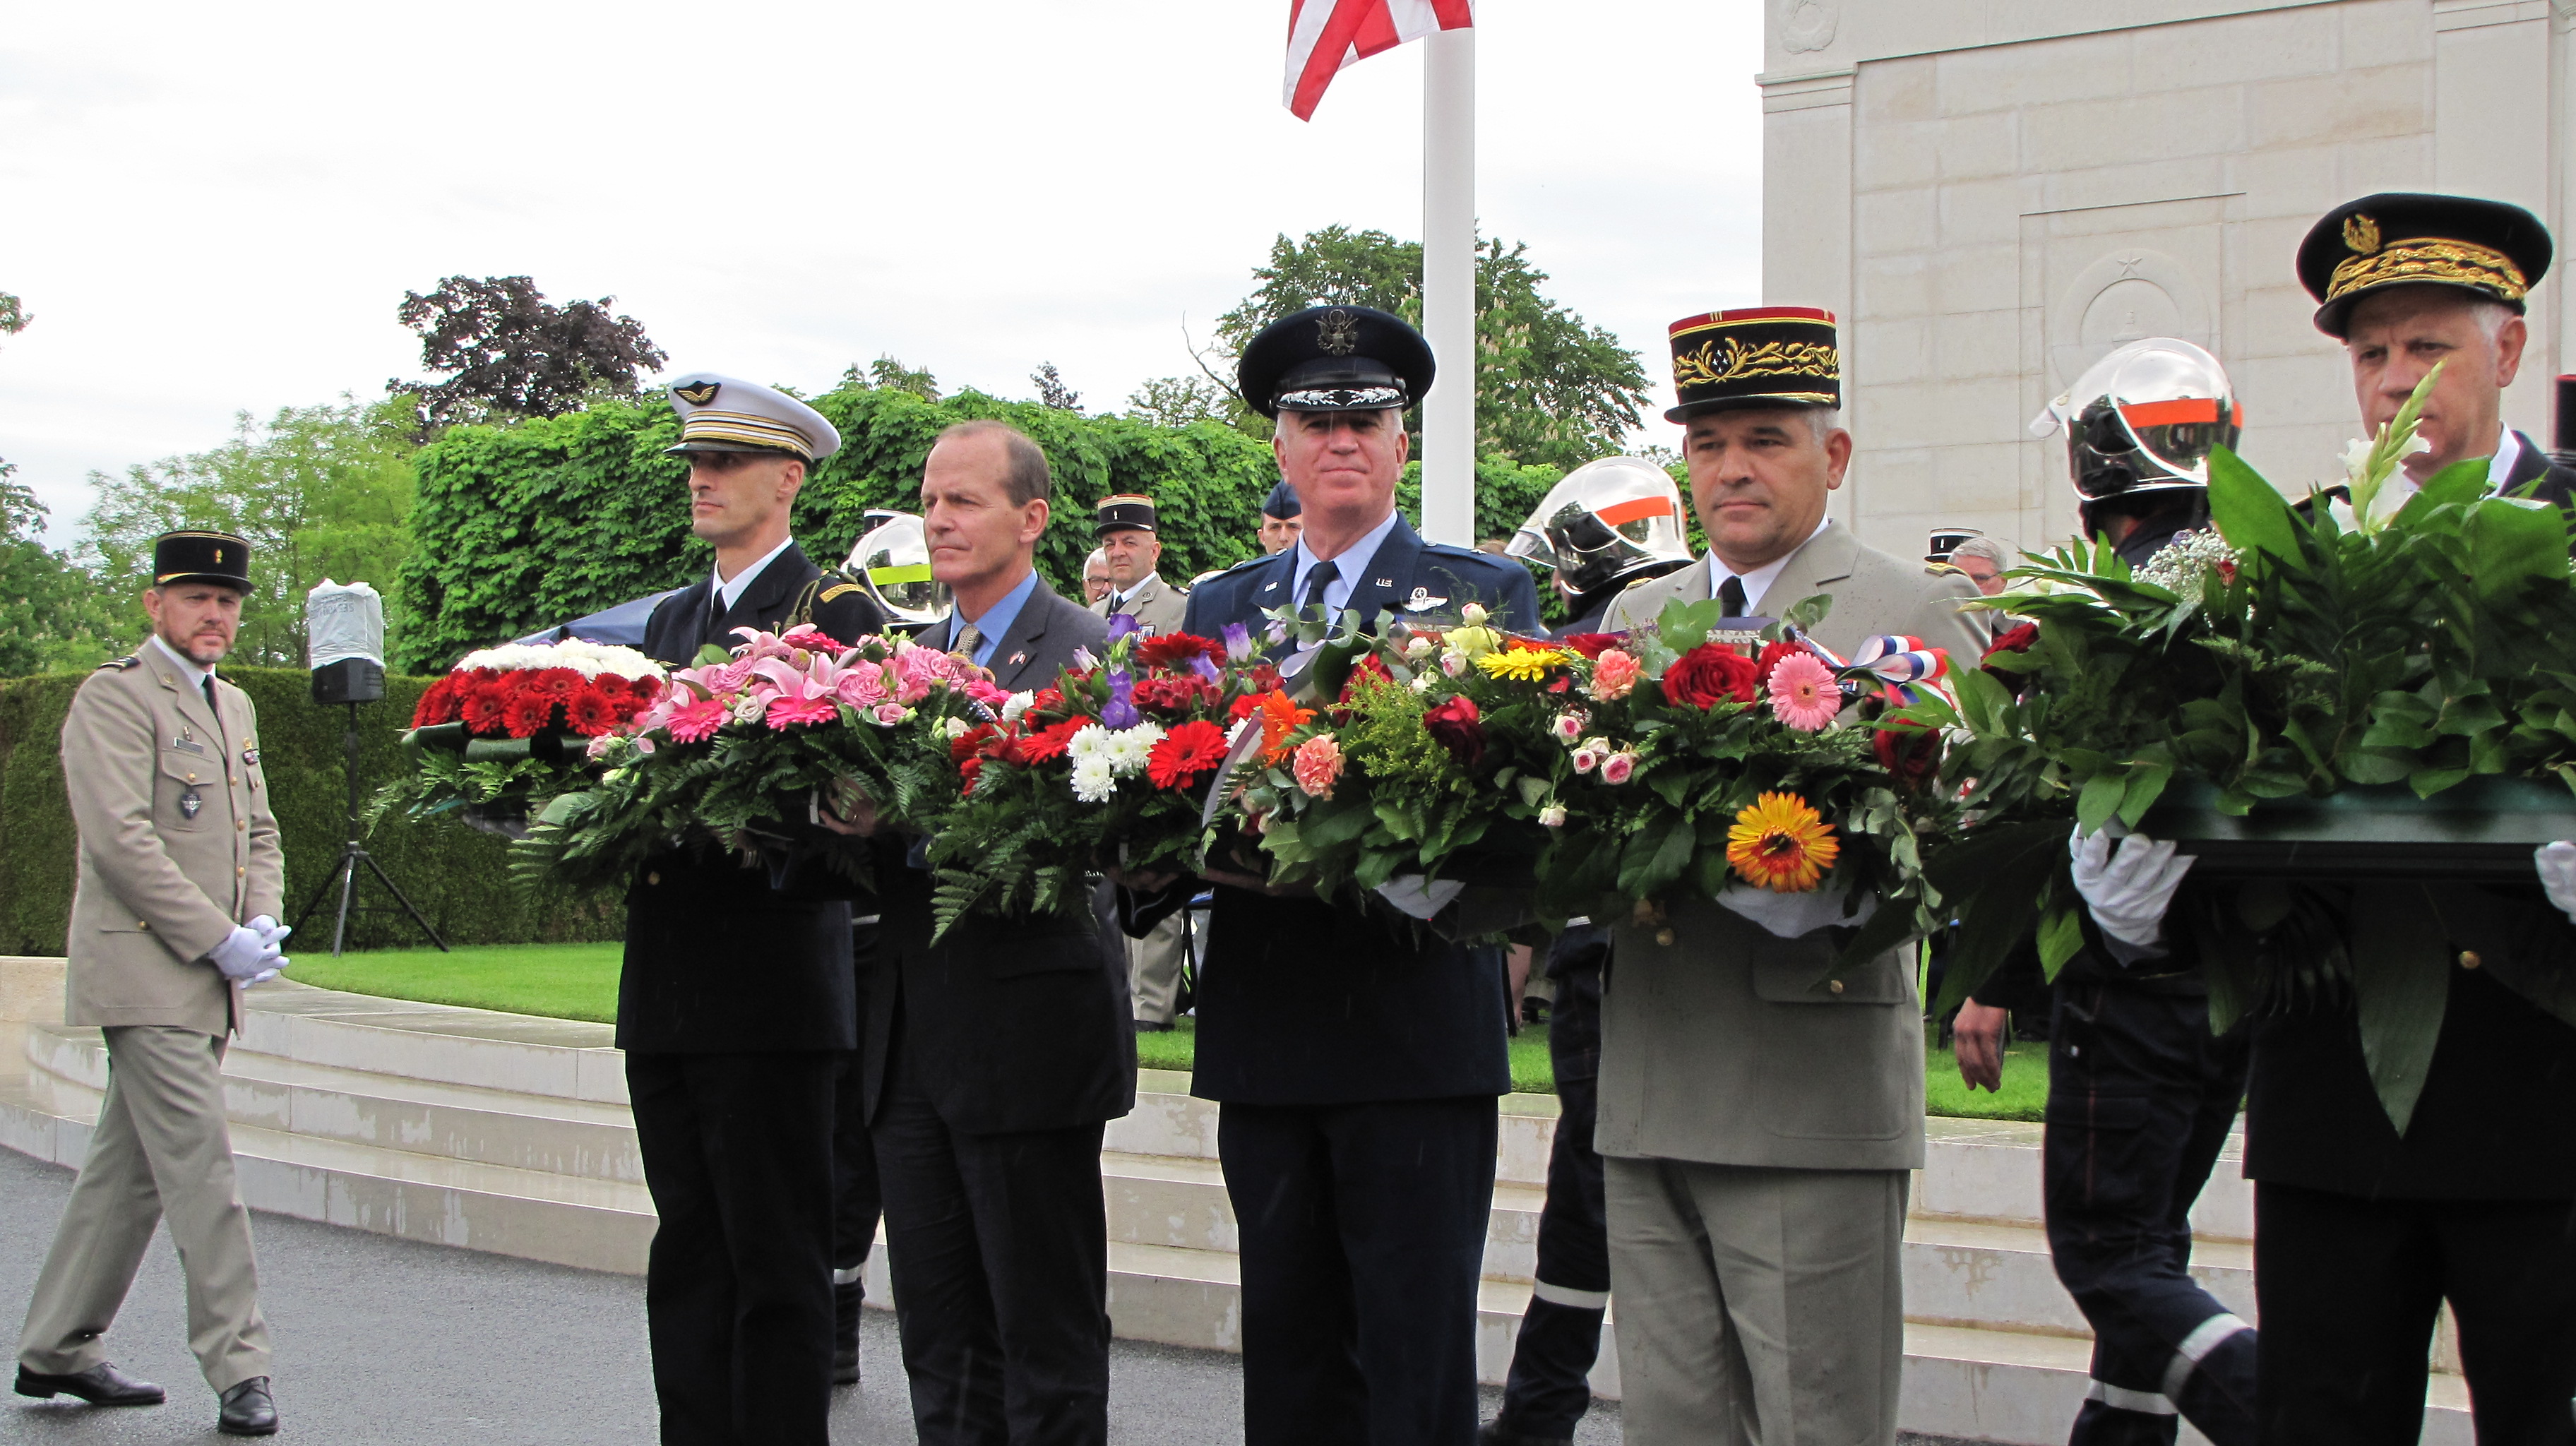 Men hold floral wreaths in preparation for wreath laying. 